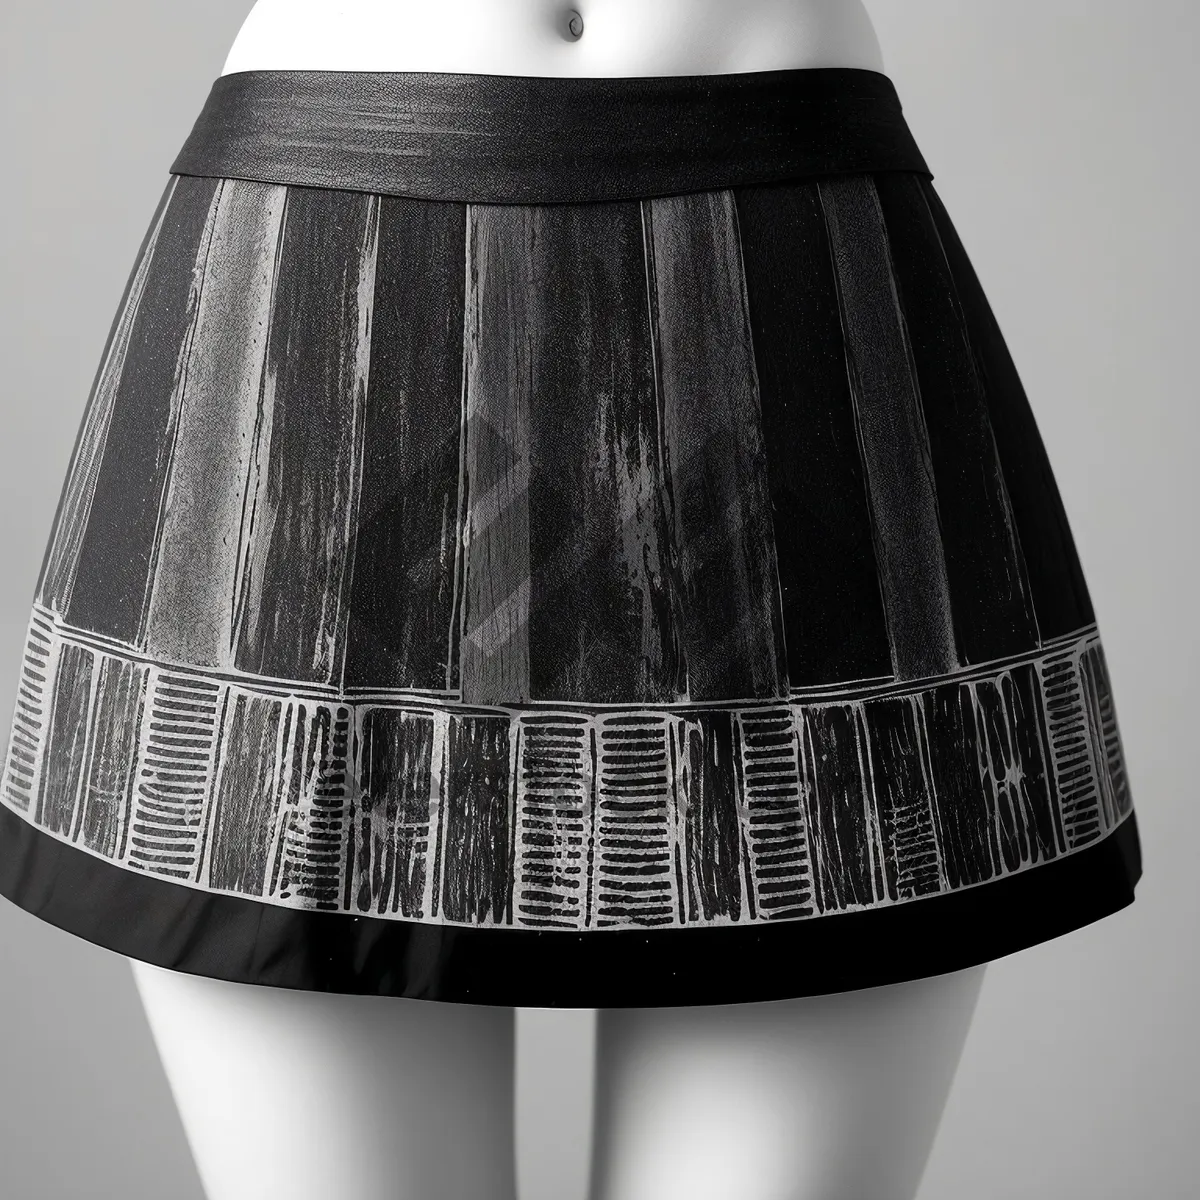 Picture of Tartan Miniskirt: Stylish Fabric Garment with Lampshade-inspired Fashion